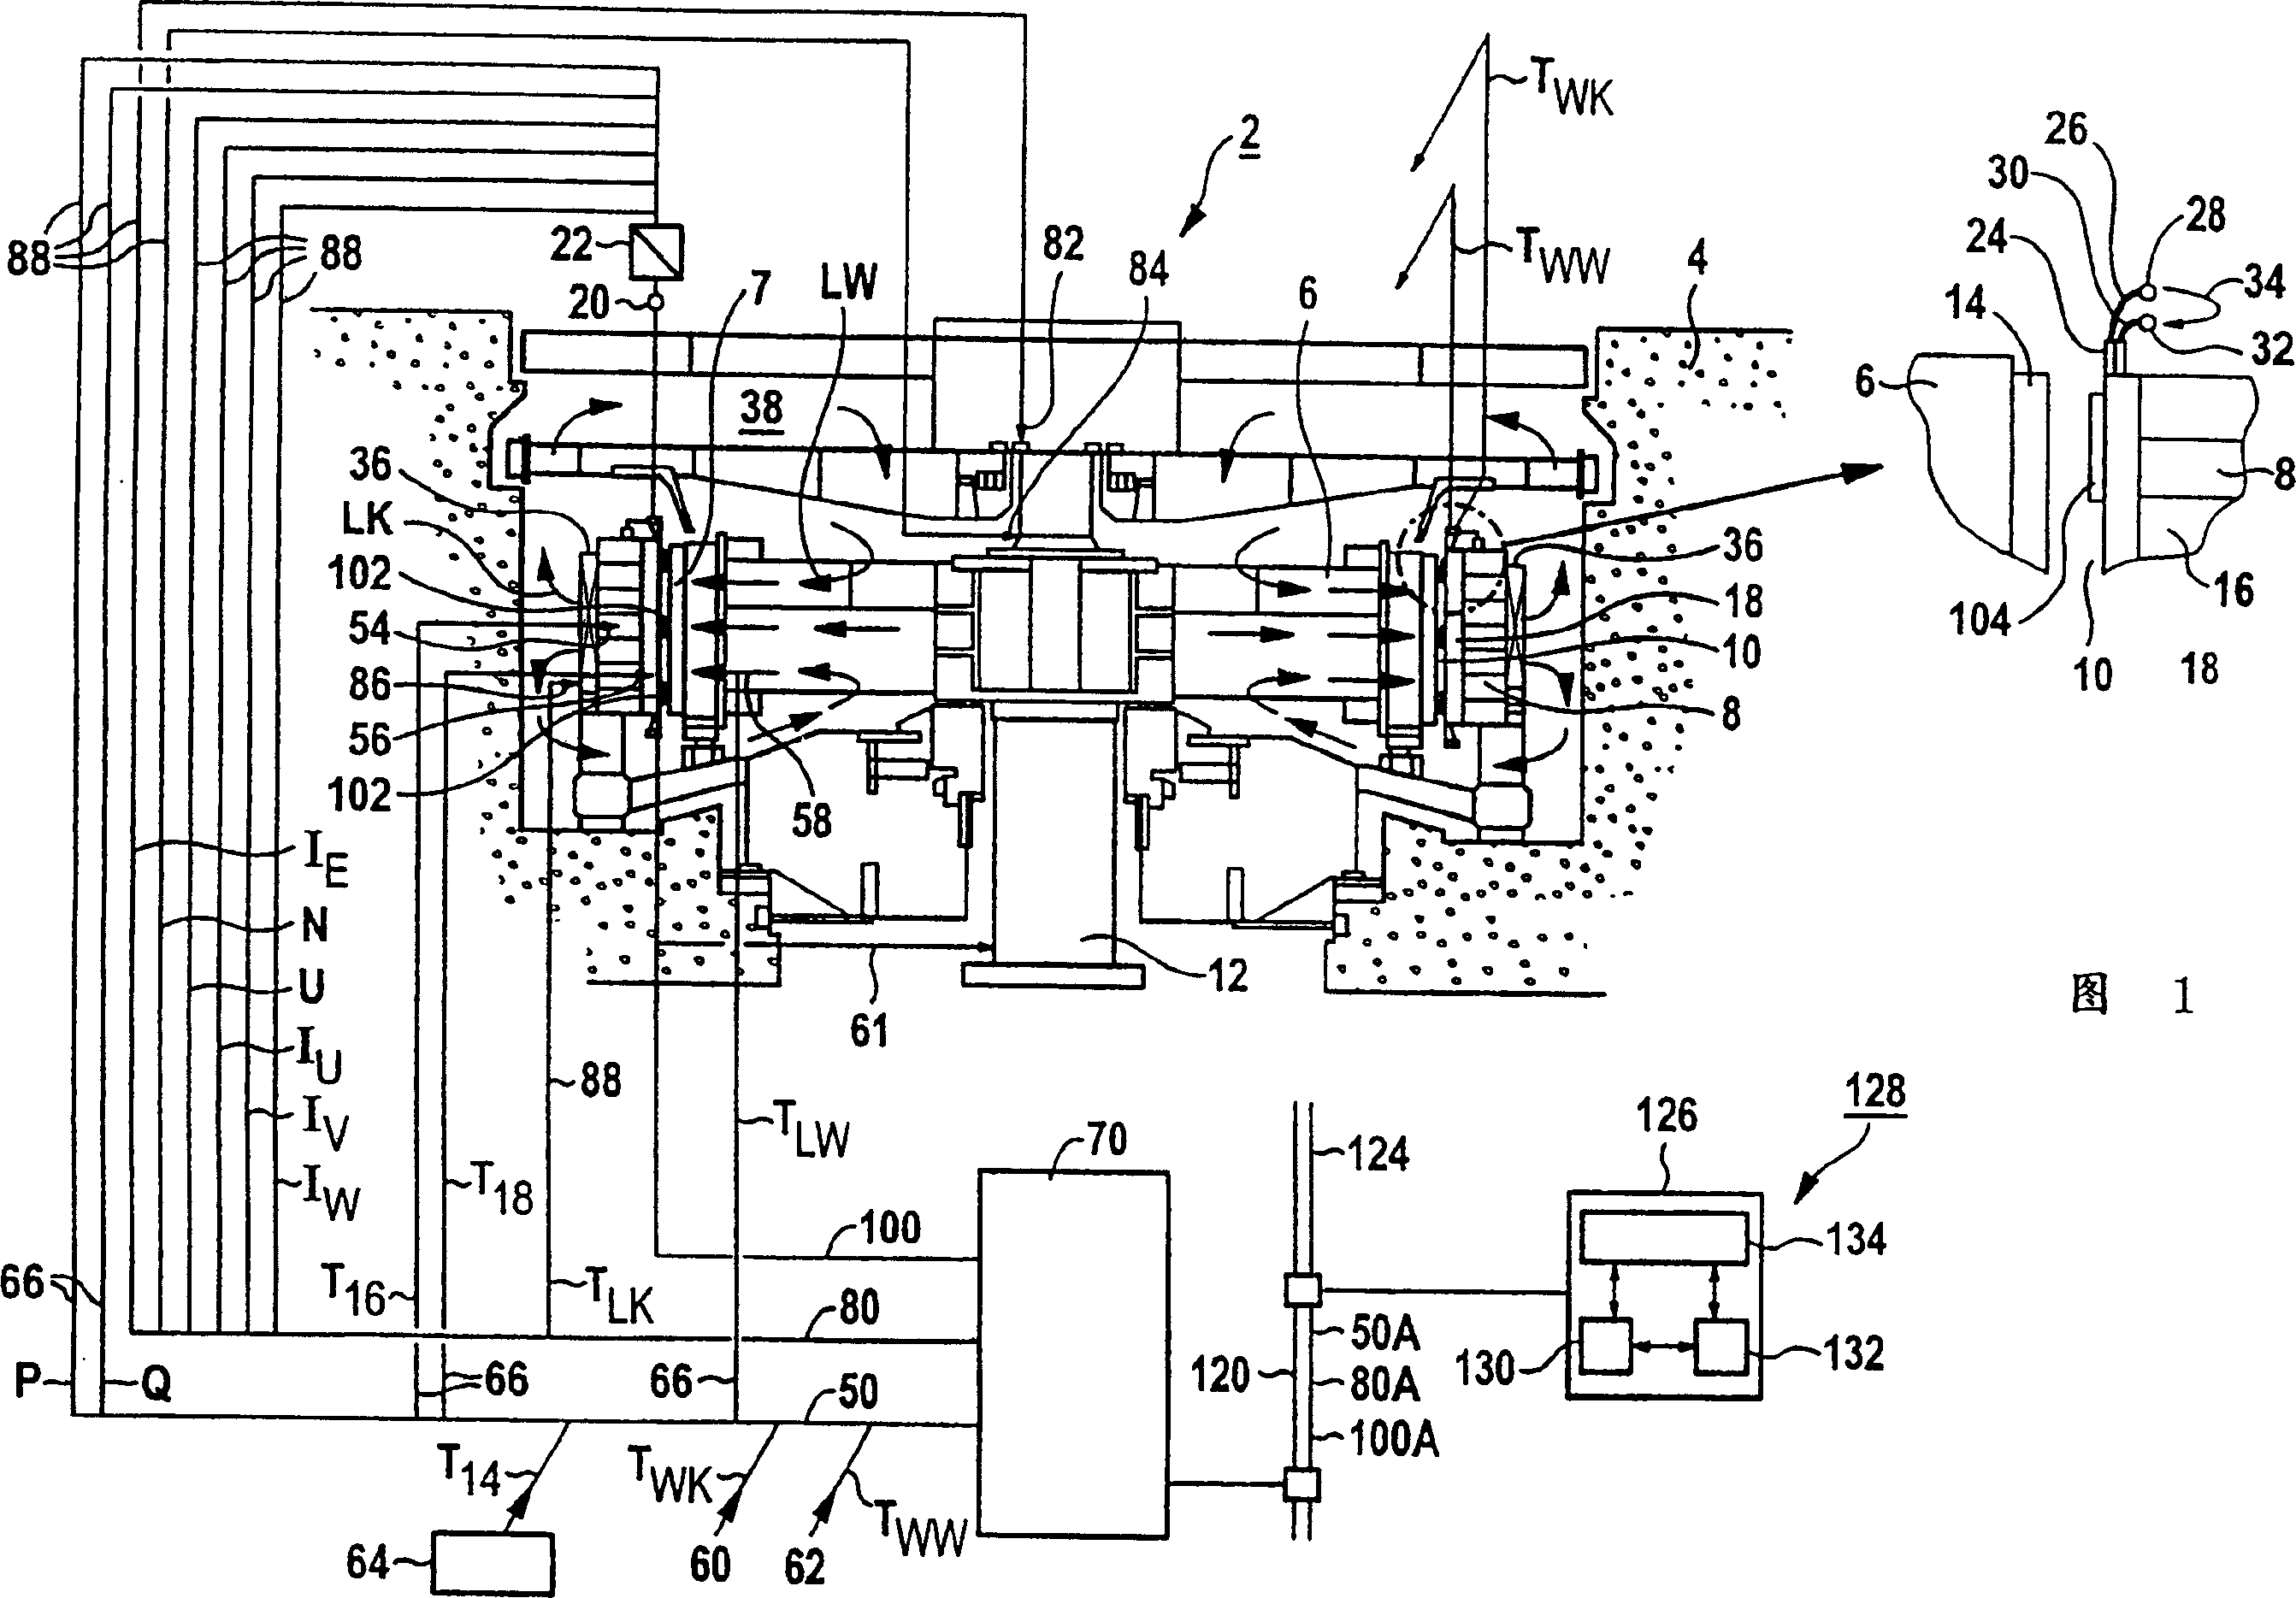 Method for monitoring radial gap between rotor and stator of electric generators and device for carrying out said method